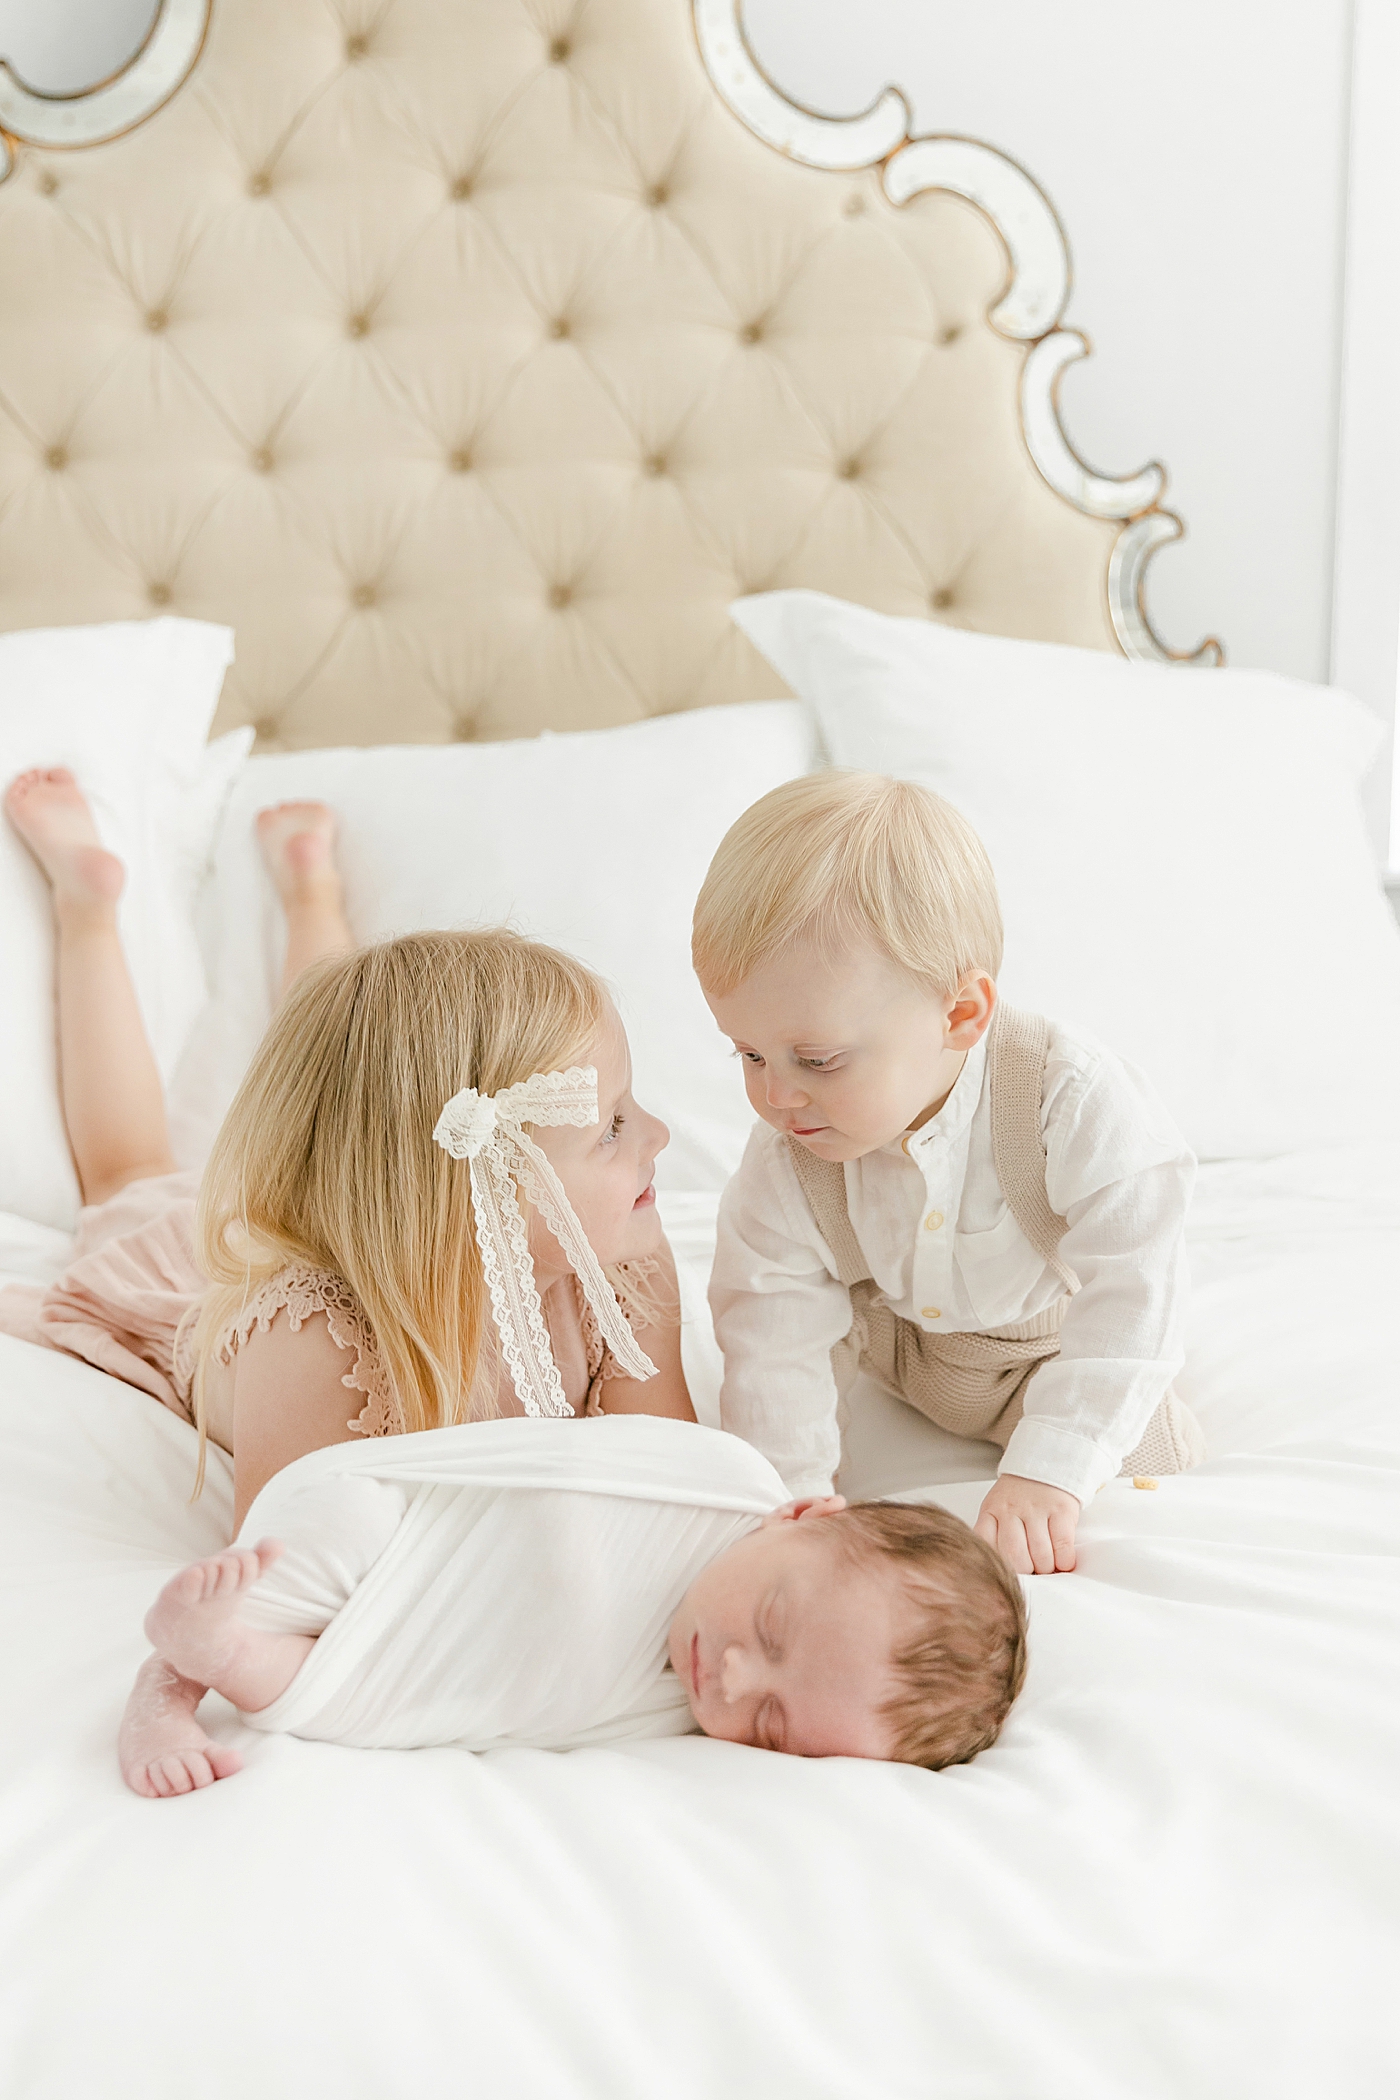 Big brother and sister snuggling with their newborn baby brother | Image by Sana Ahmed Photography